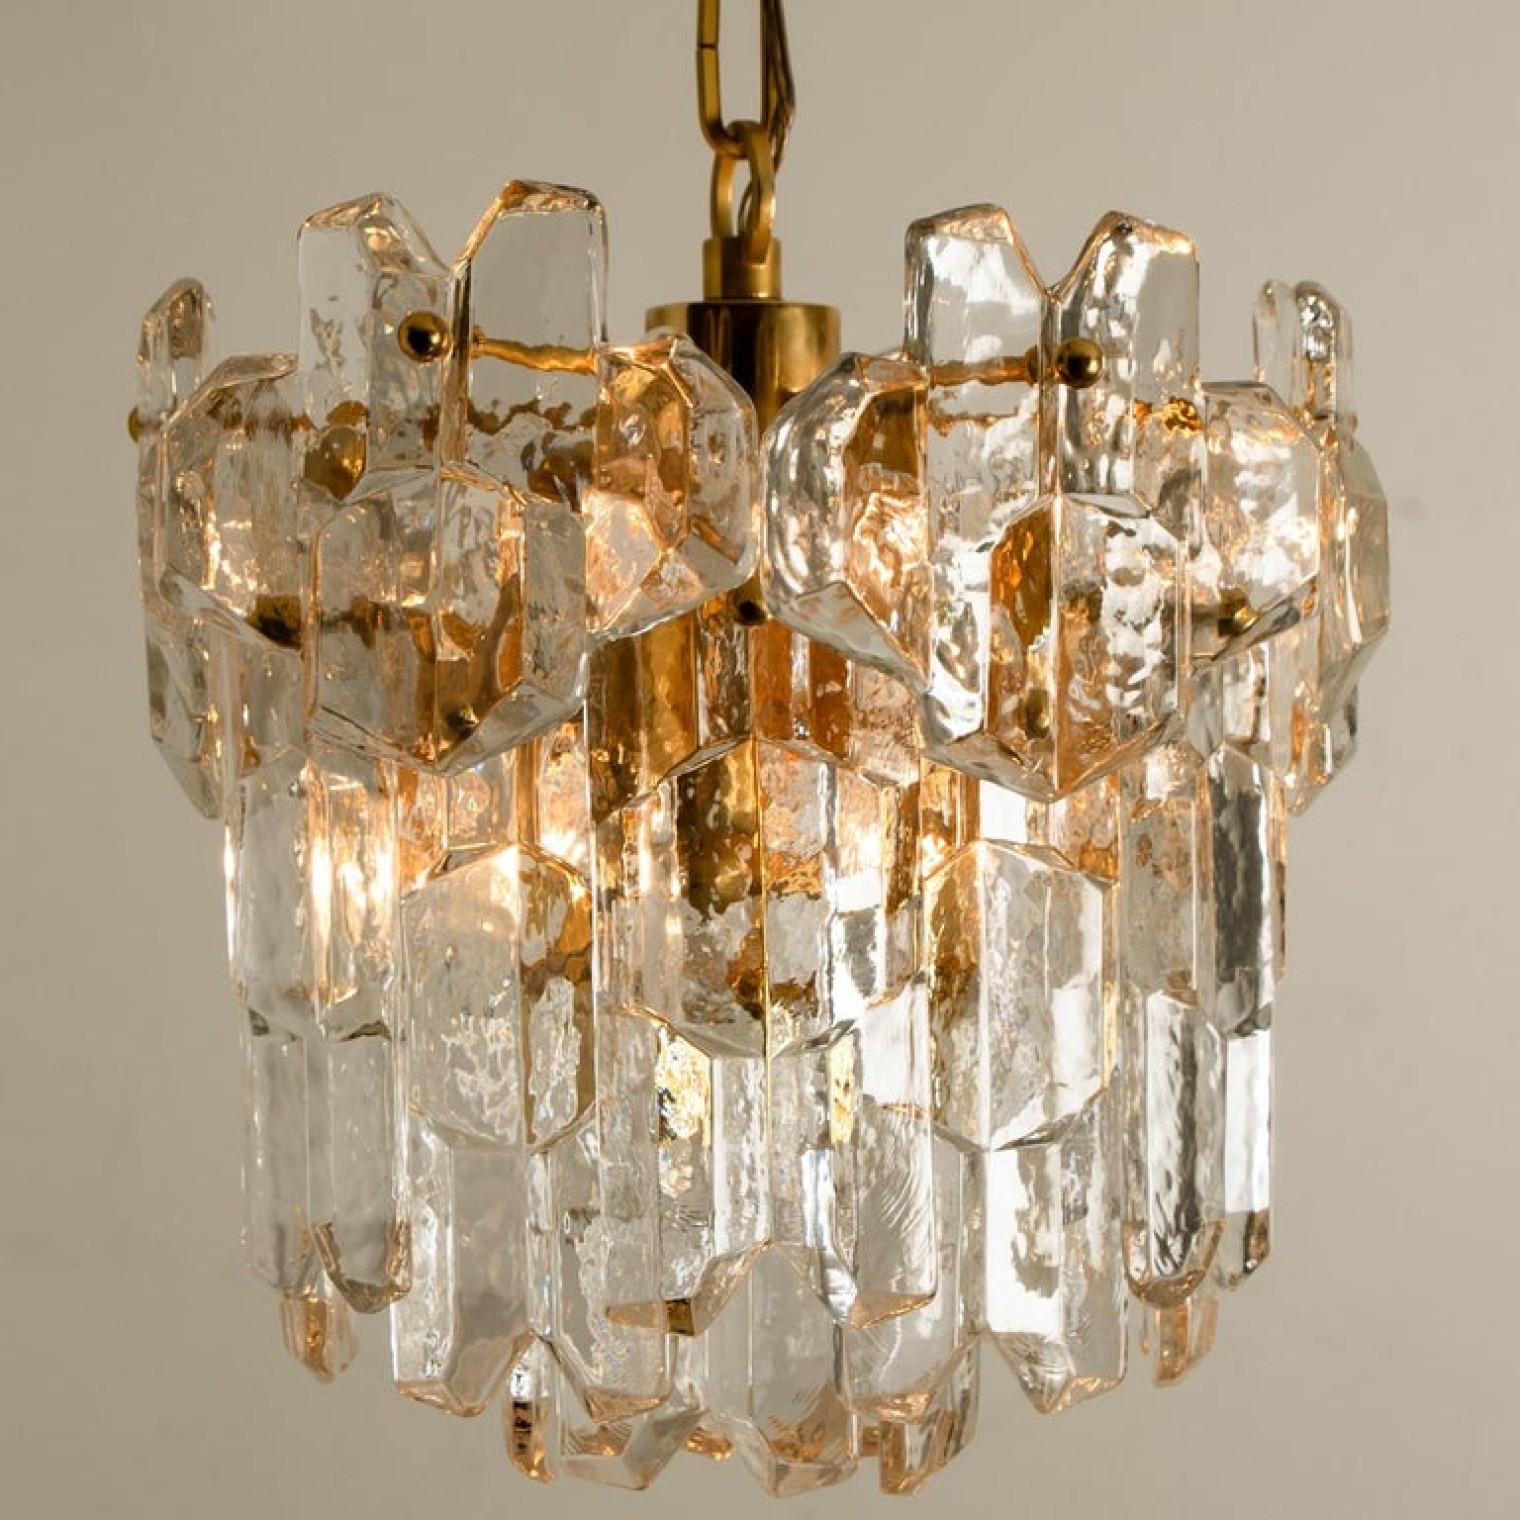 High-End J.T. Kalmar 'Palazzo' Wall Light Fixture, Gilt Brass and Glass, 1970s In Good Condition For Sale In Rijssen, NL